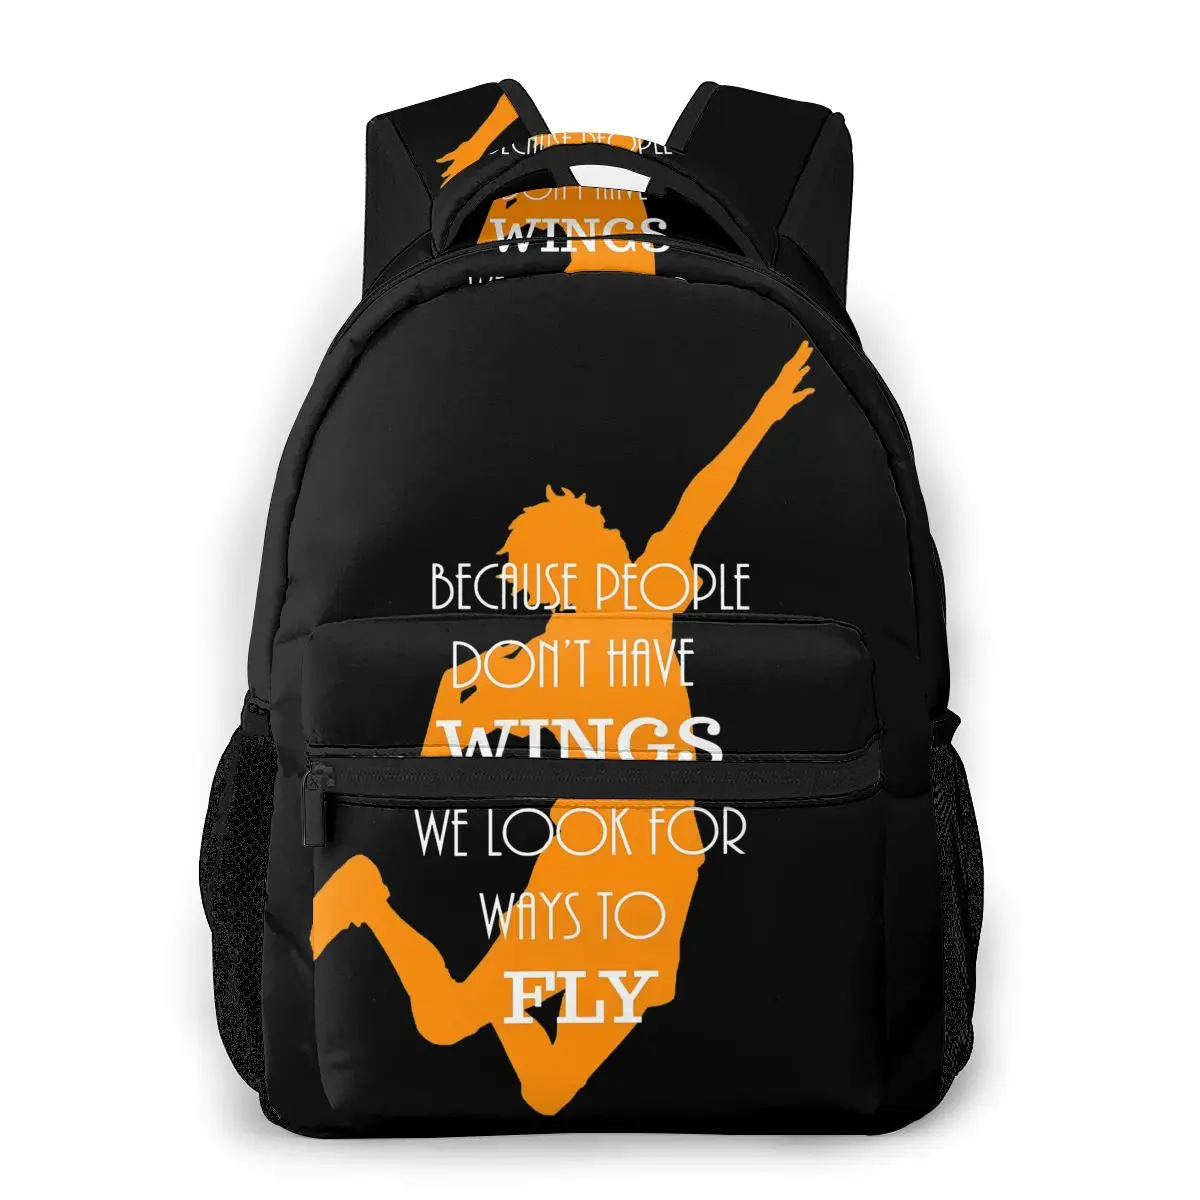 

People Don't Have Wings We Look For Ways To Fly for Teenage school bag Toddlers Bag Haikyuu Travel Rucksack For Boys and Girls